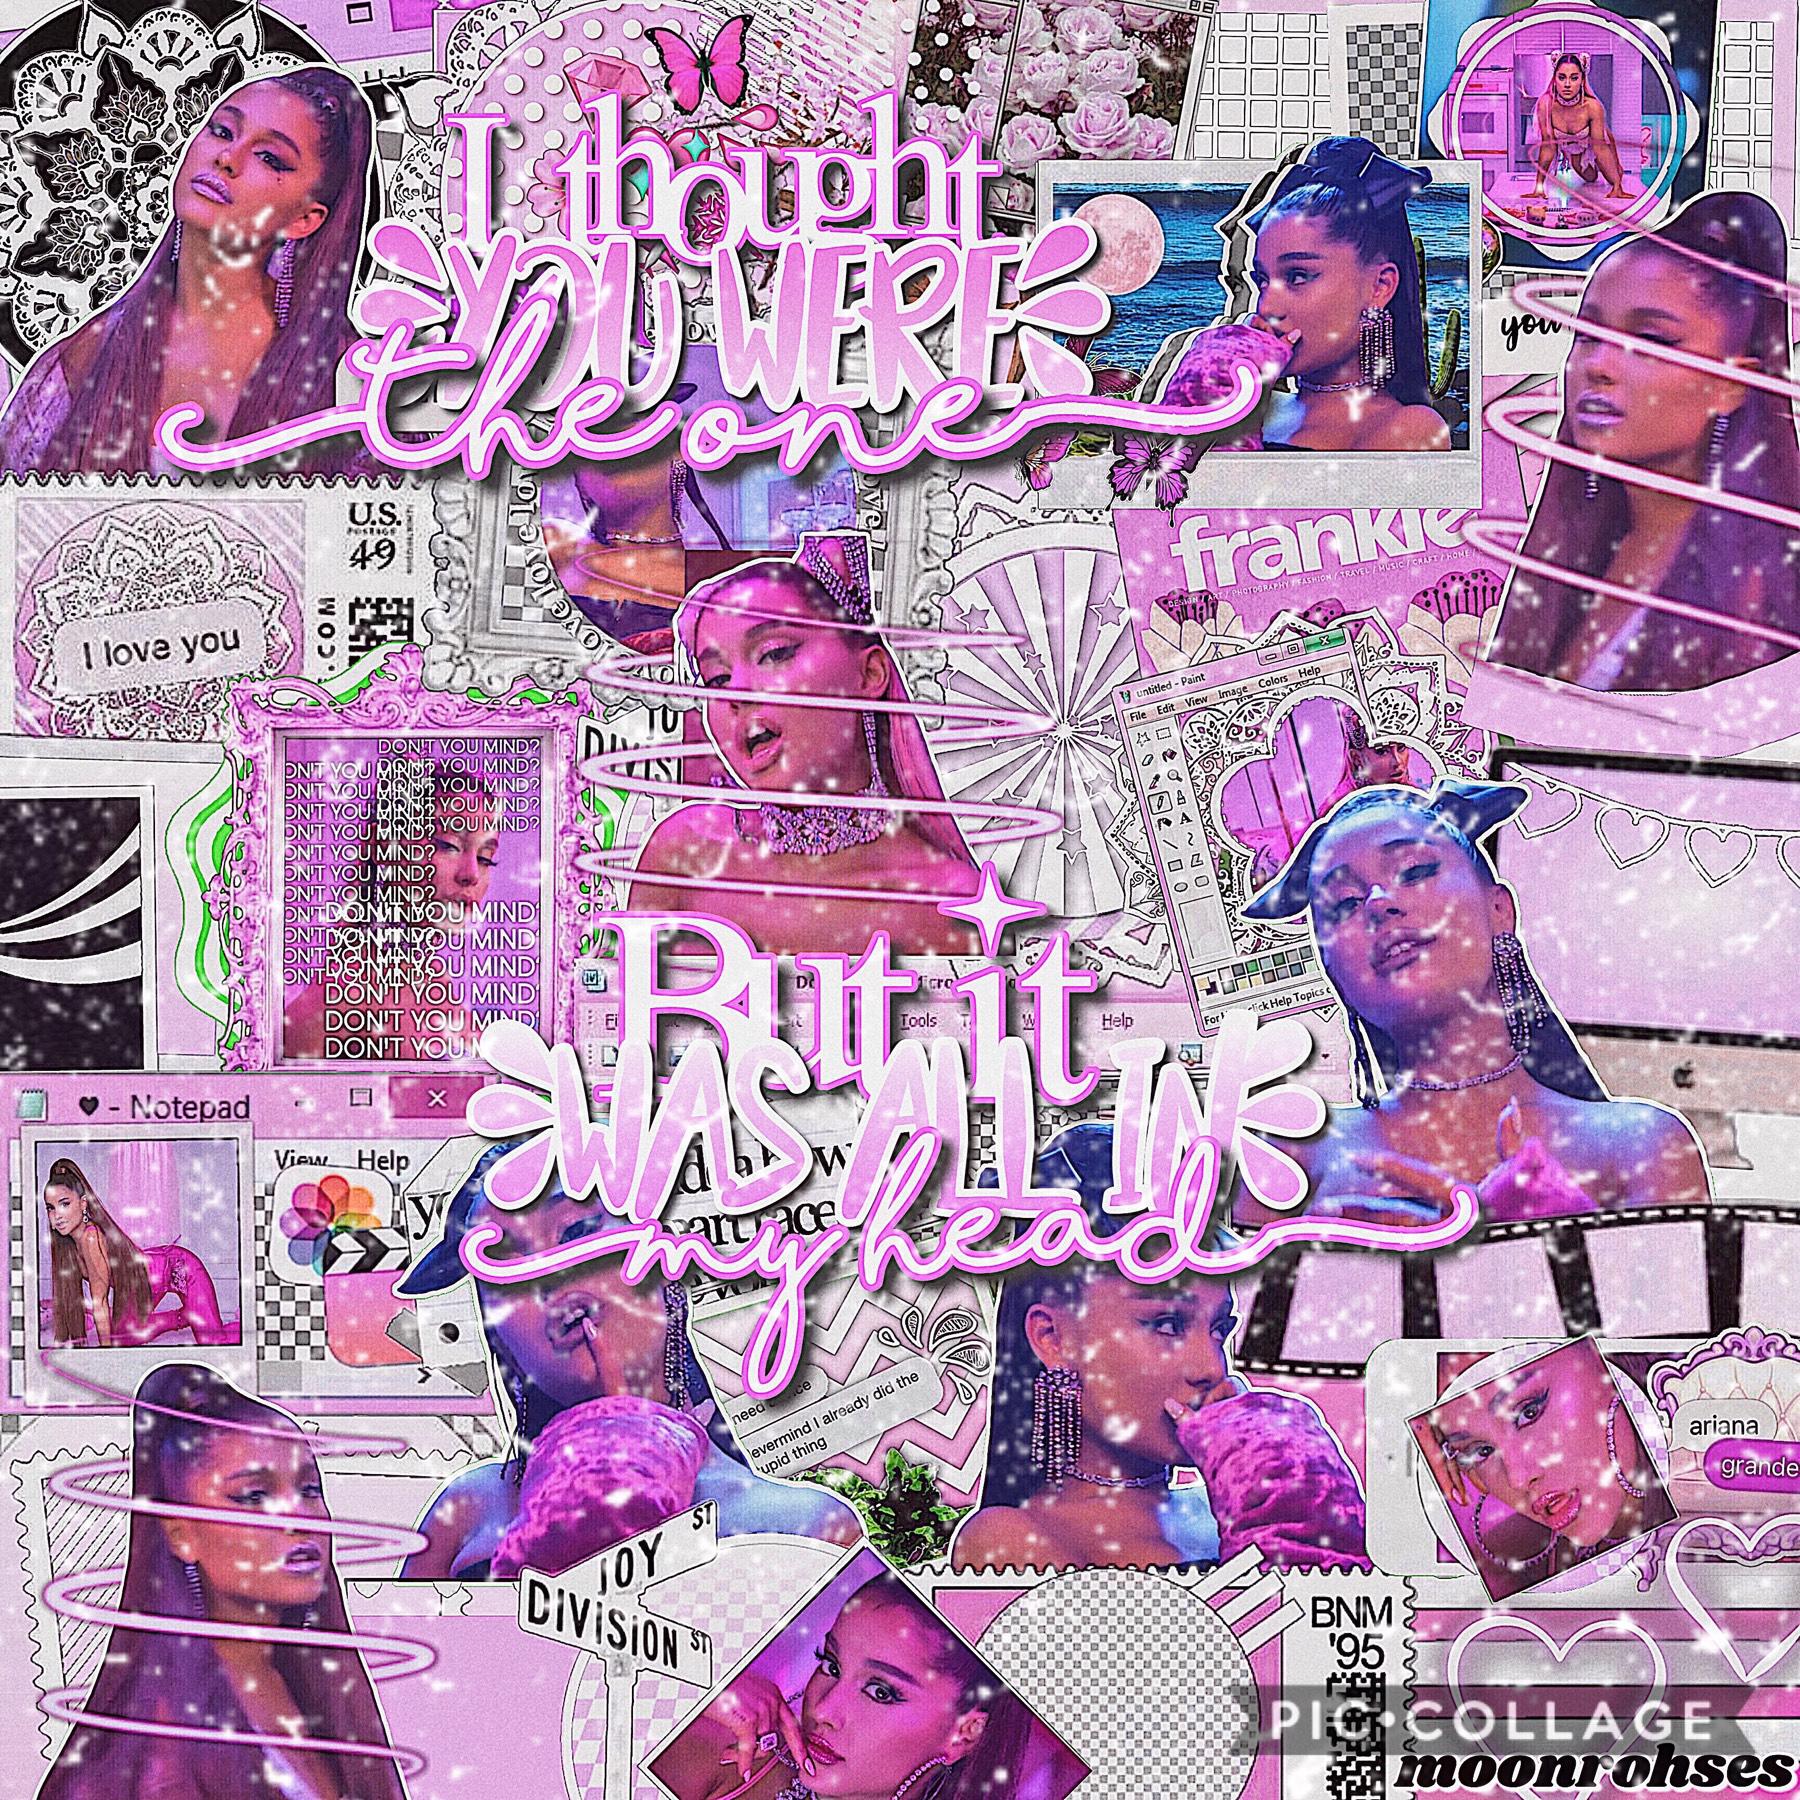 💜 t a p 💜

I can’t stop making collages I have an issue. Other then that, I actually like how this has turned out 
Thank you guys for 11.4k!! You guys are awesome 😎💜

Song: In my head - Ariana Grande 

Rate ?/10